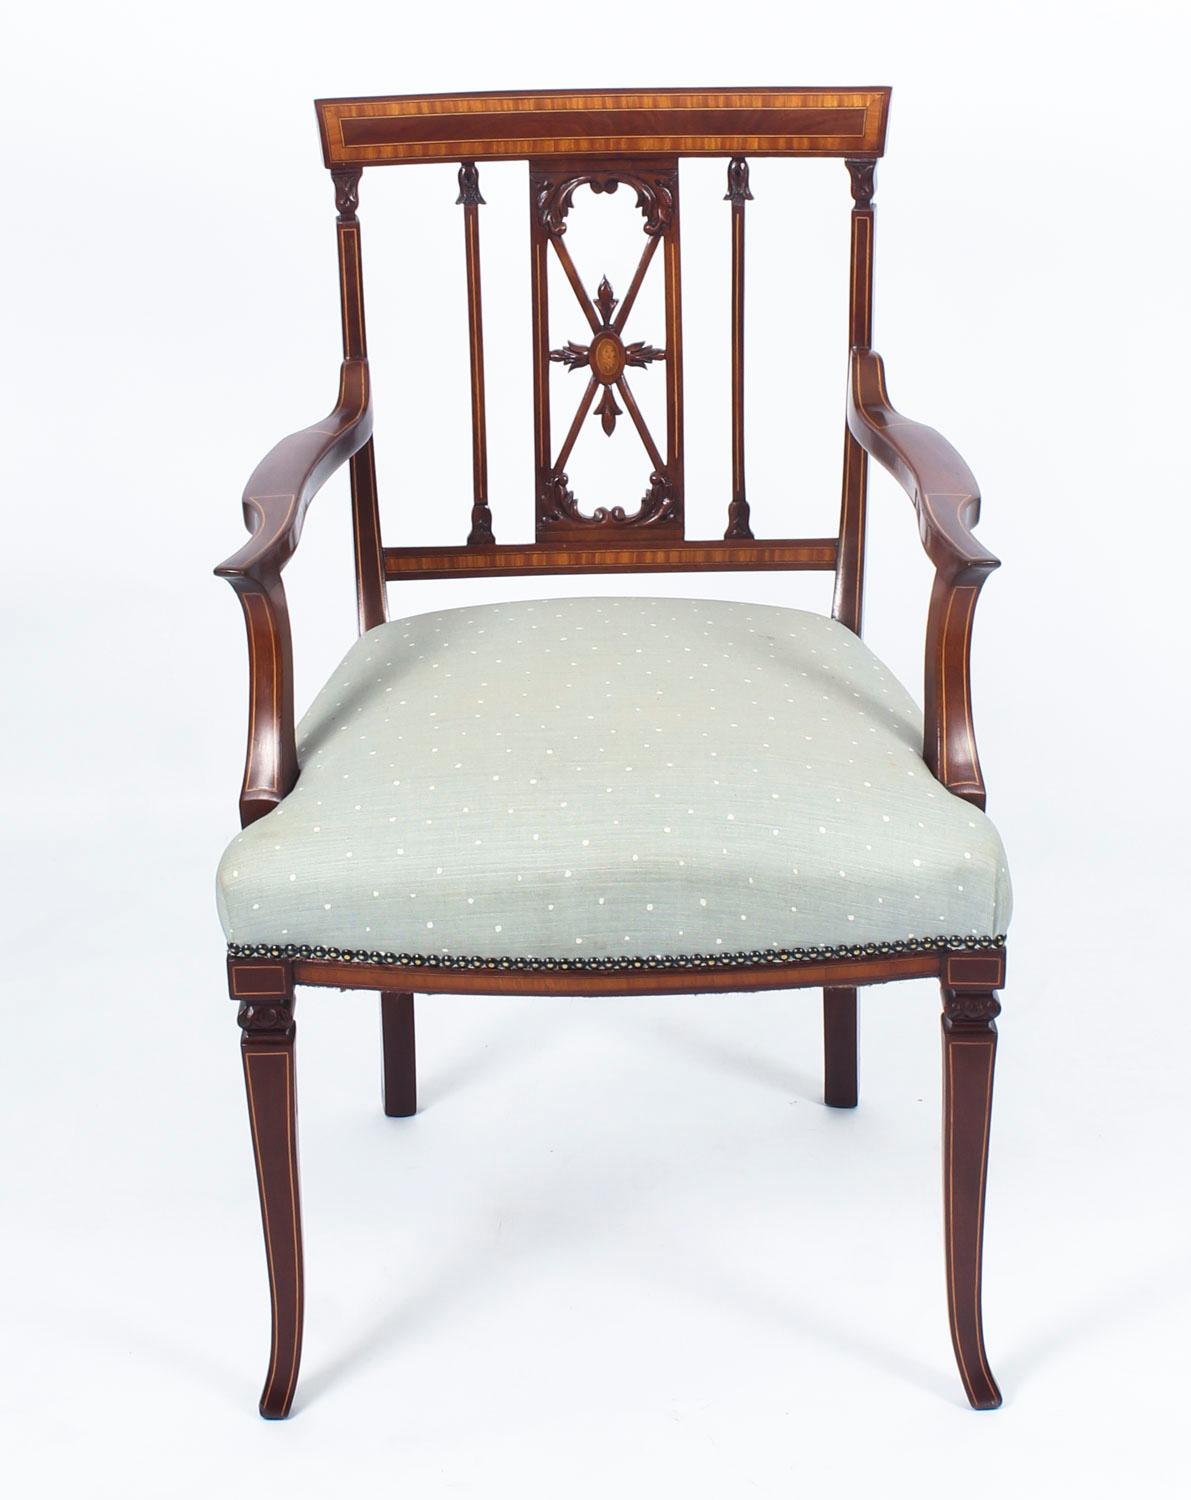 This is a beautiful antique Sheraton Revival mahogany armchair, circa 1880 in date.

With satinwood crossbanding and stringing and decorative pierced leaf carved splat. It has outward scrolled arms on shaped supports, an overstuffed bowed seat in a